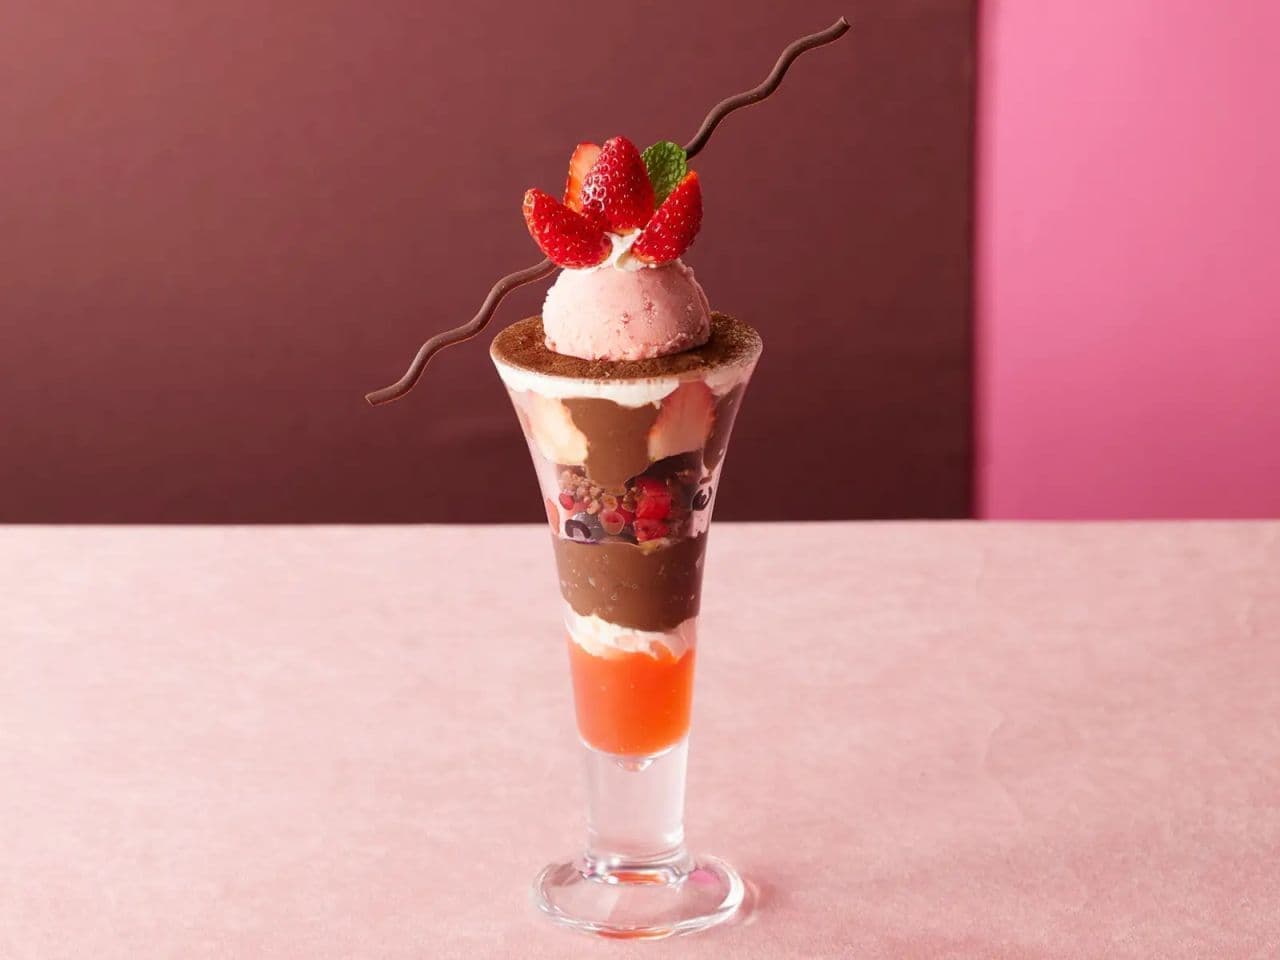 Cocos "Strawberry and Chocolate Parfait"